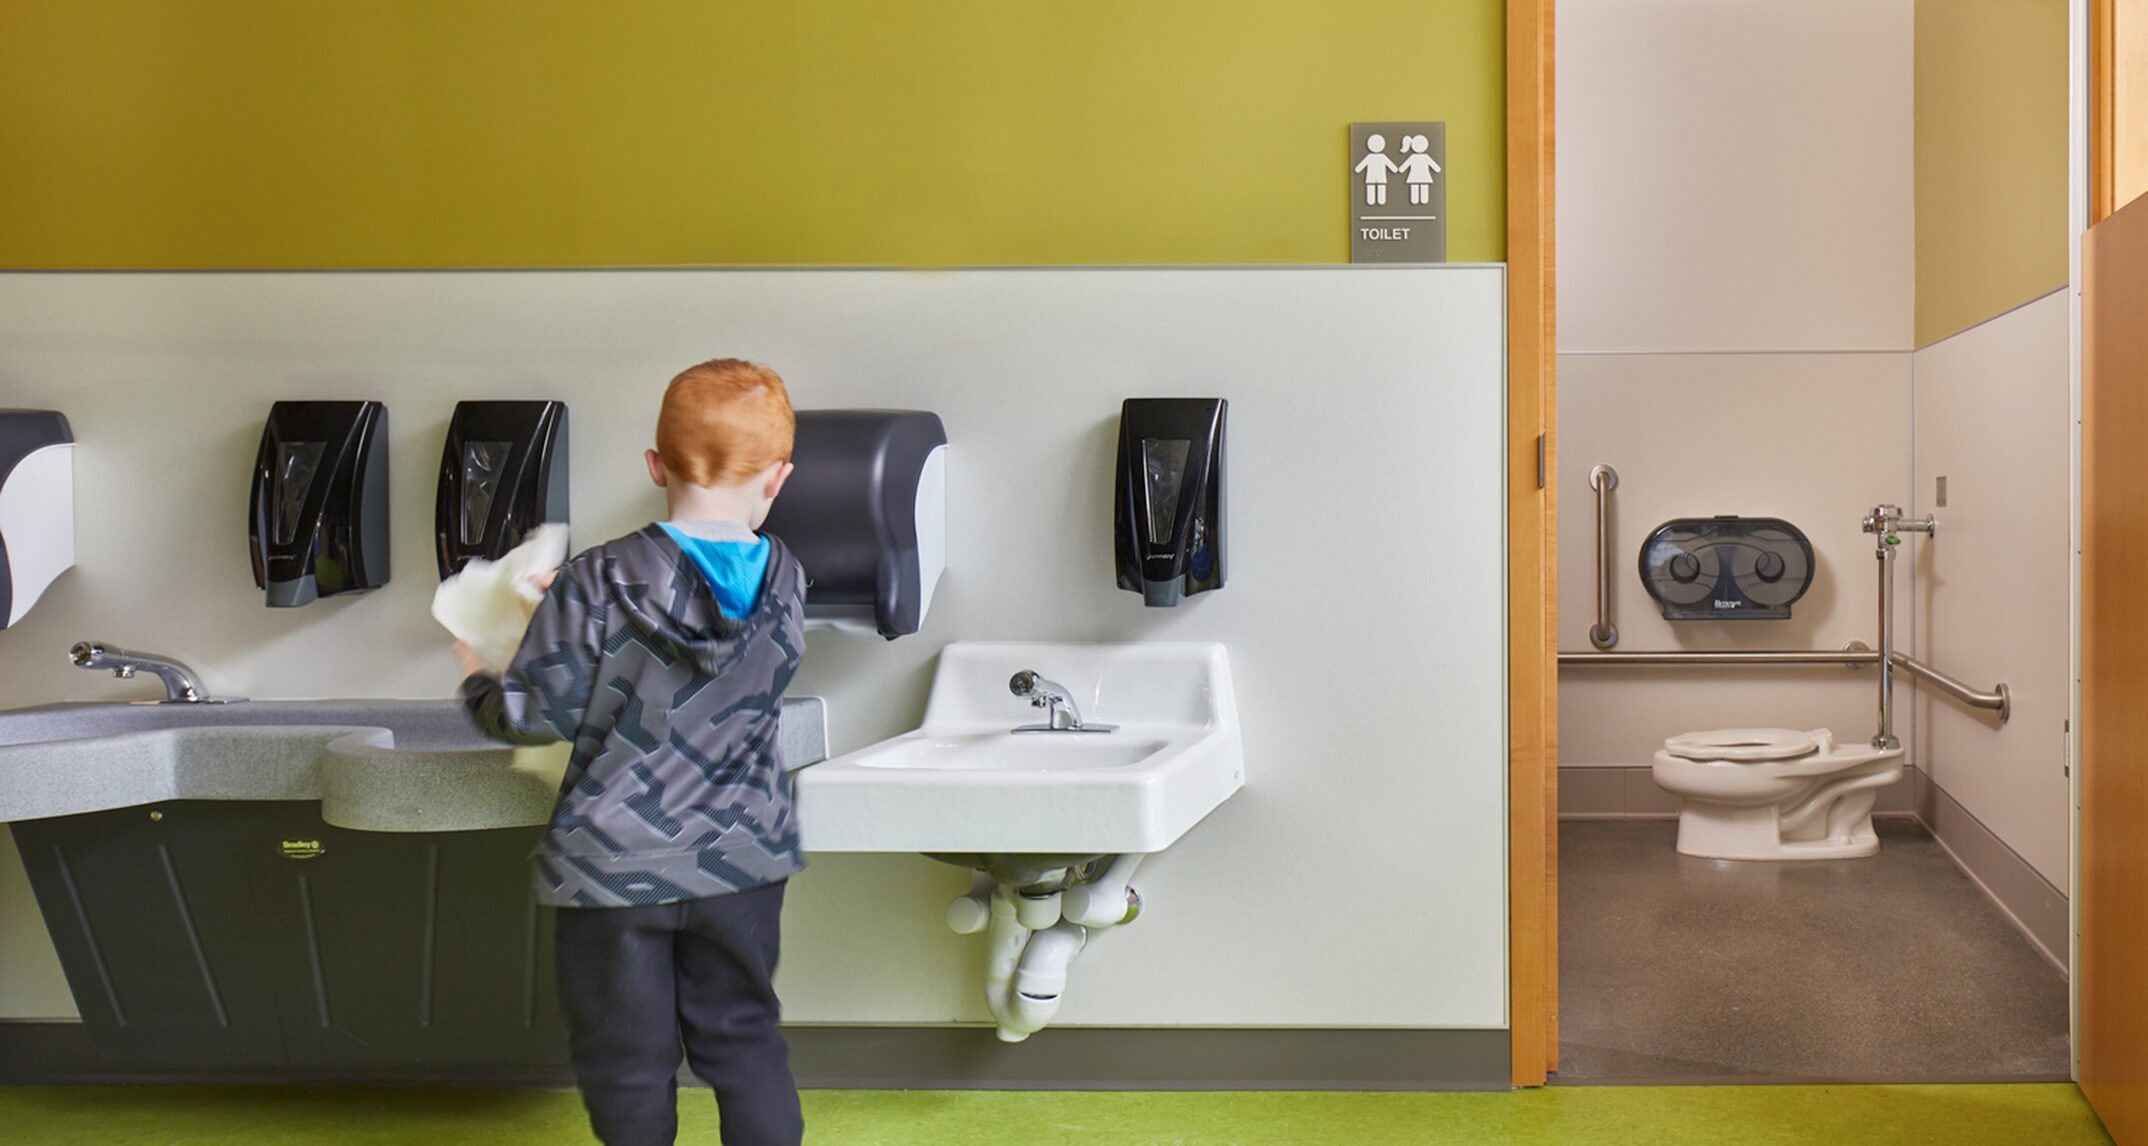 Sinks, toilets, and accessories are specifically designed and mounted to accommodate students ages five and under. – Lake Stevens Early Learning Center